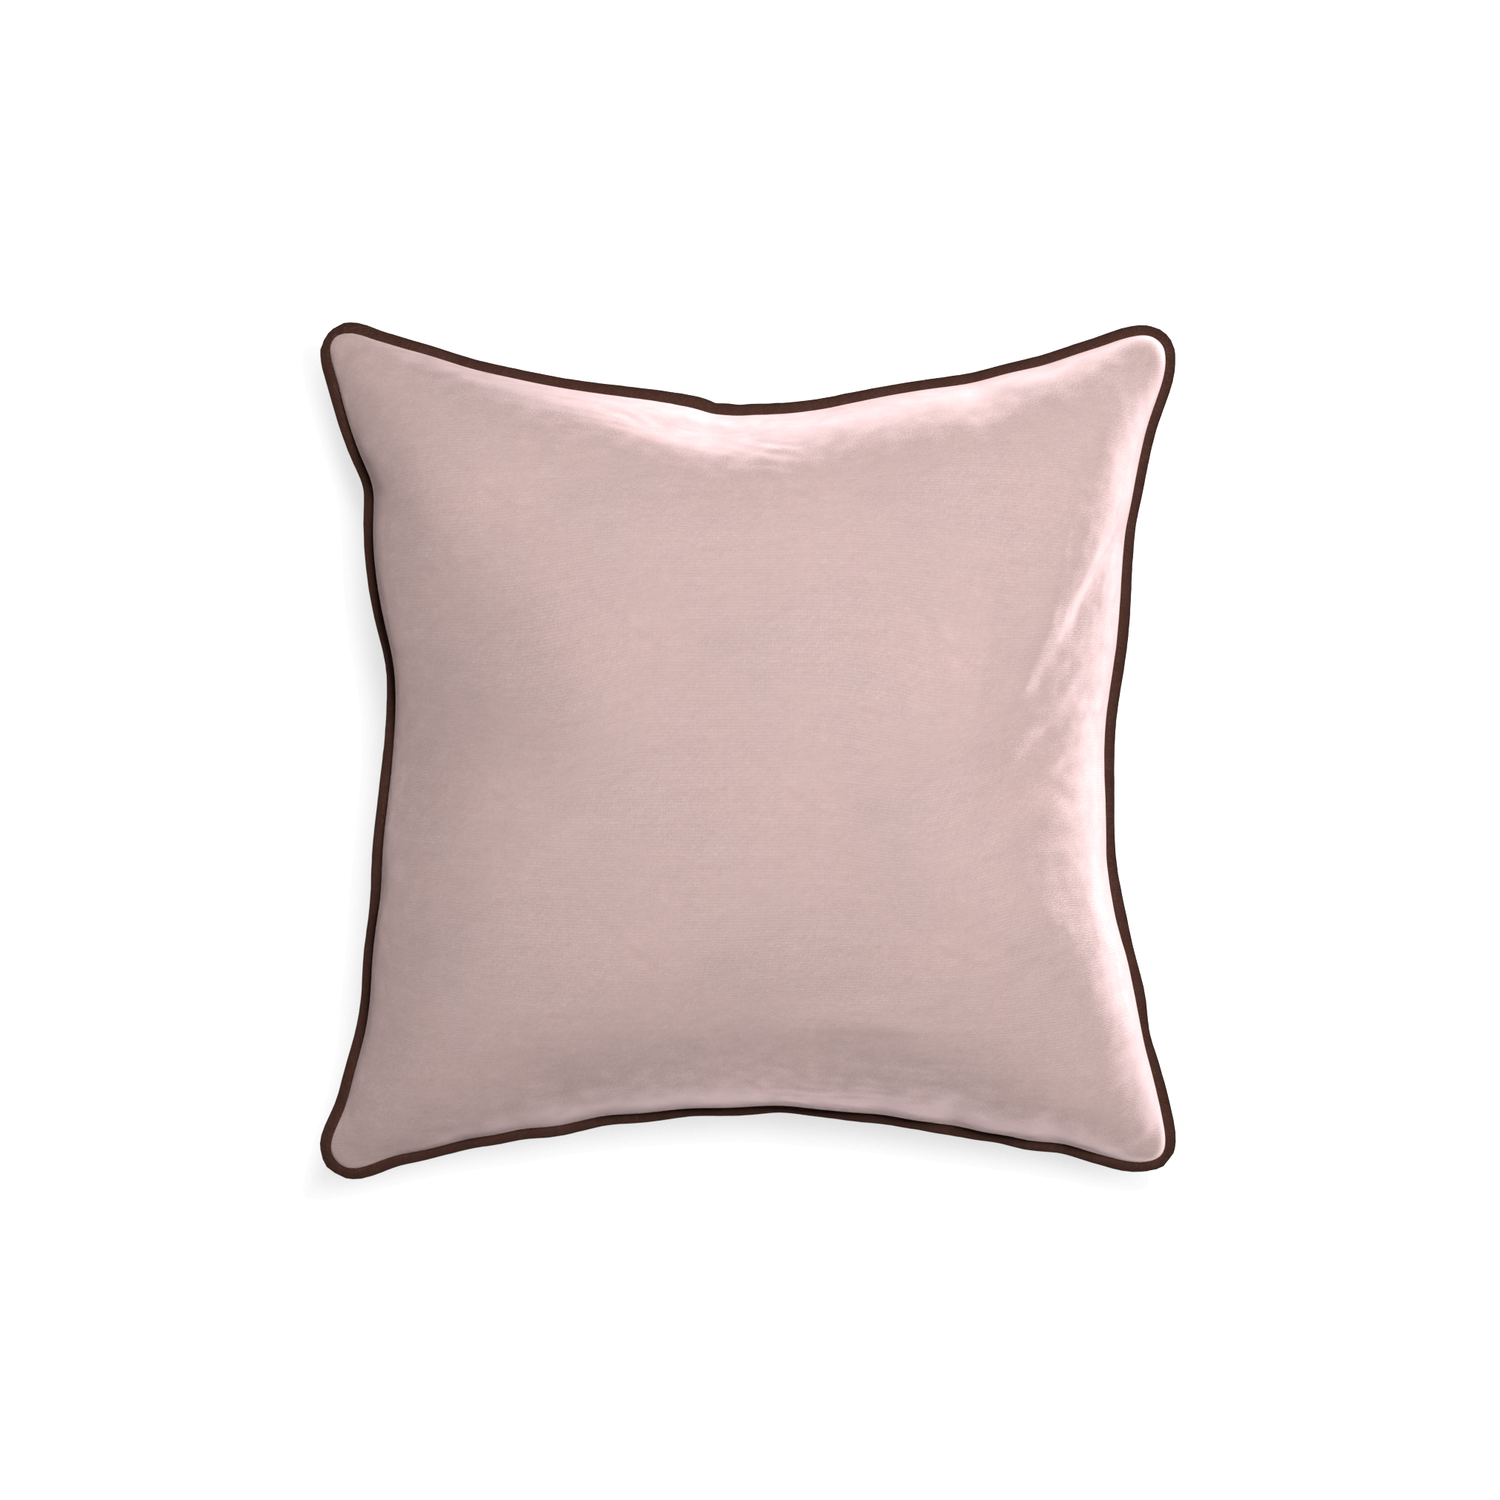 18-square rose velvet custom pillow with w piping on white background